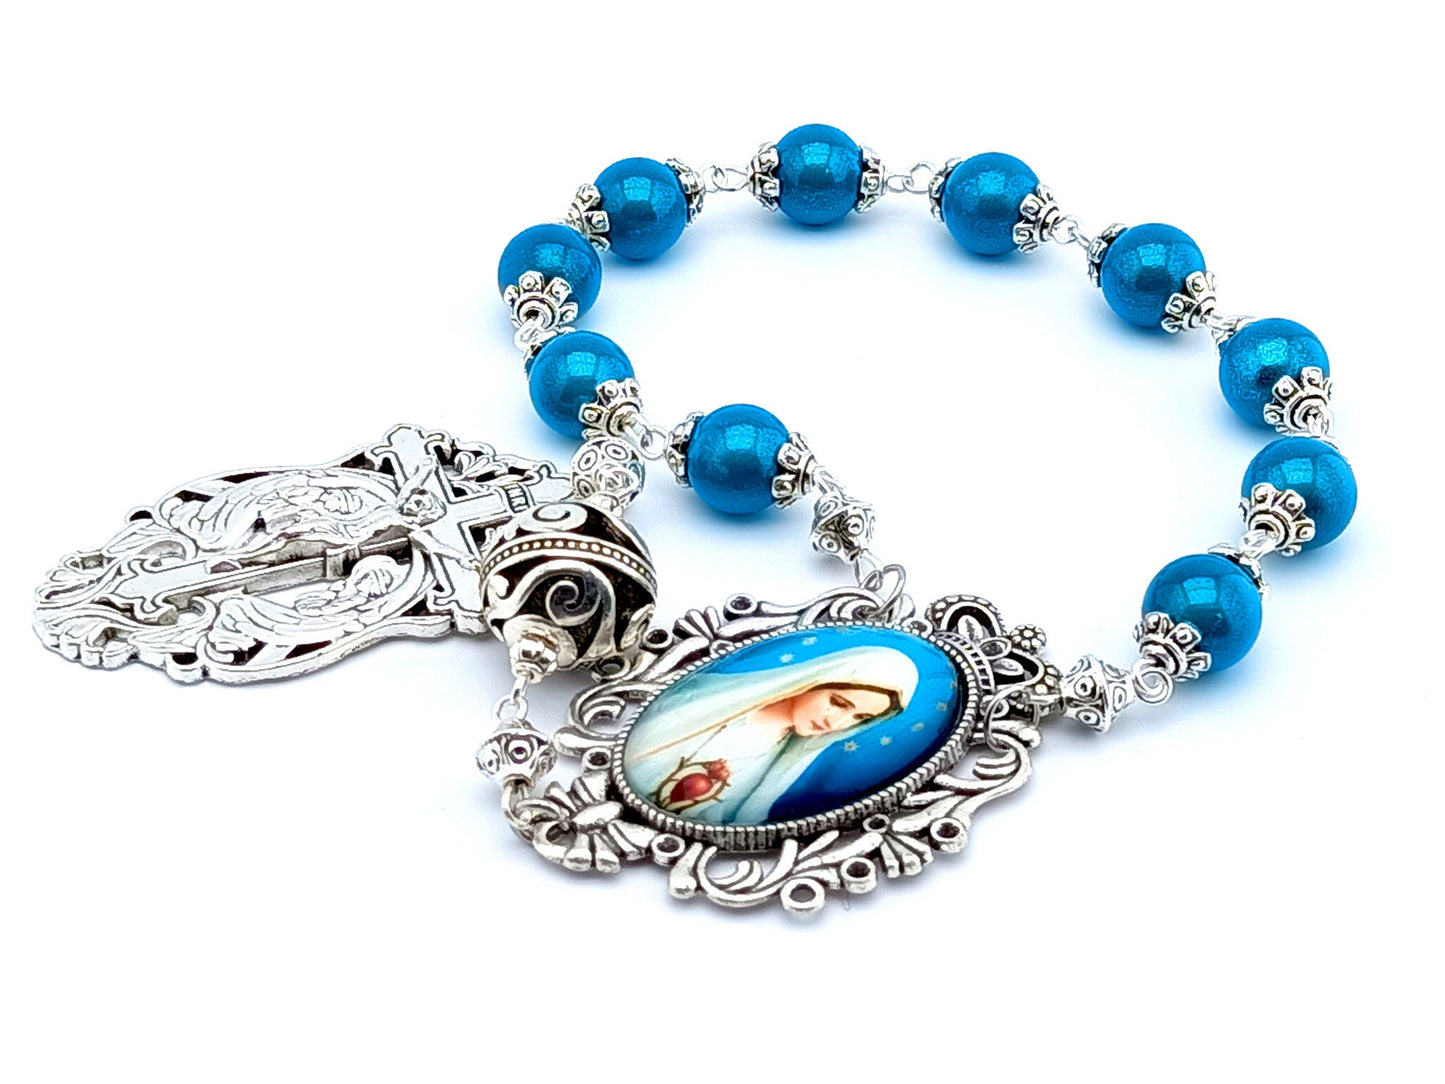 Immaculate Heart of Mary unique rosary beads single decade rosary beads with blue and silver beads, filigree crucifix and picture centre medal.